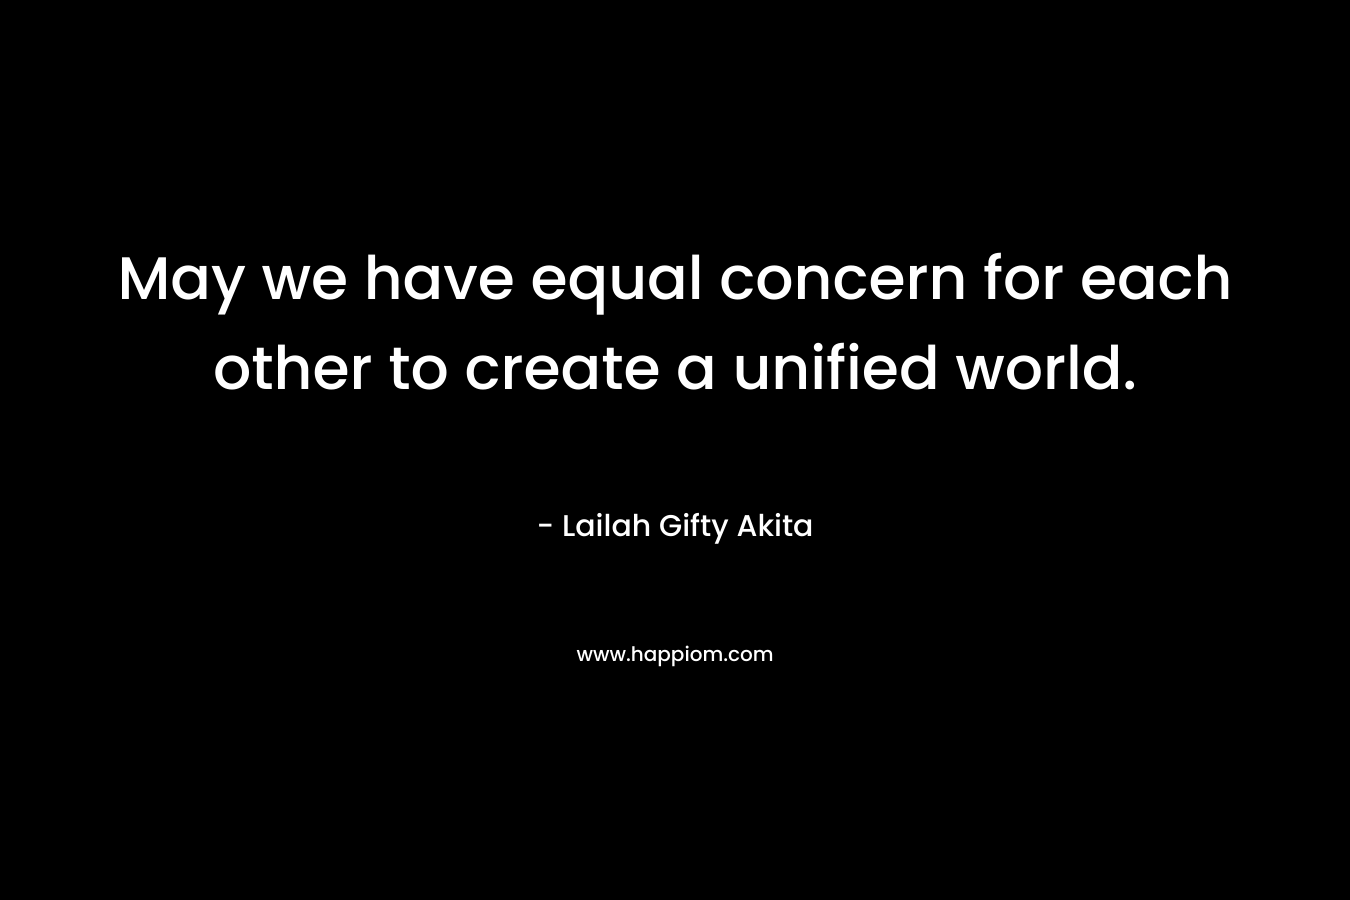 May we have equal concern for each other to create a unified world.